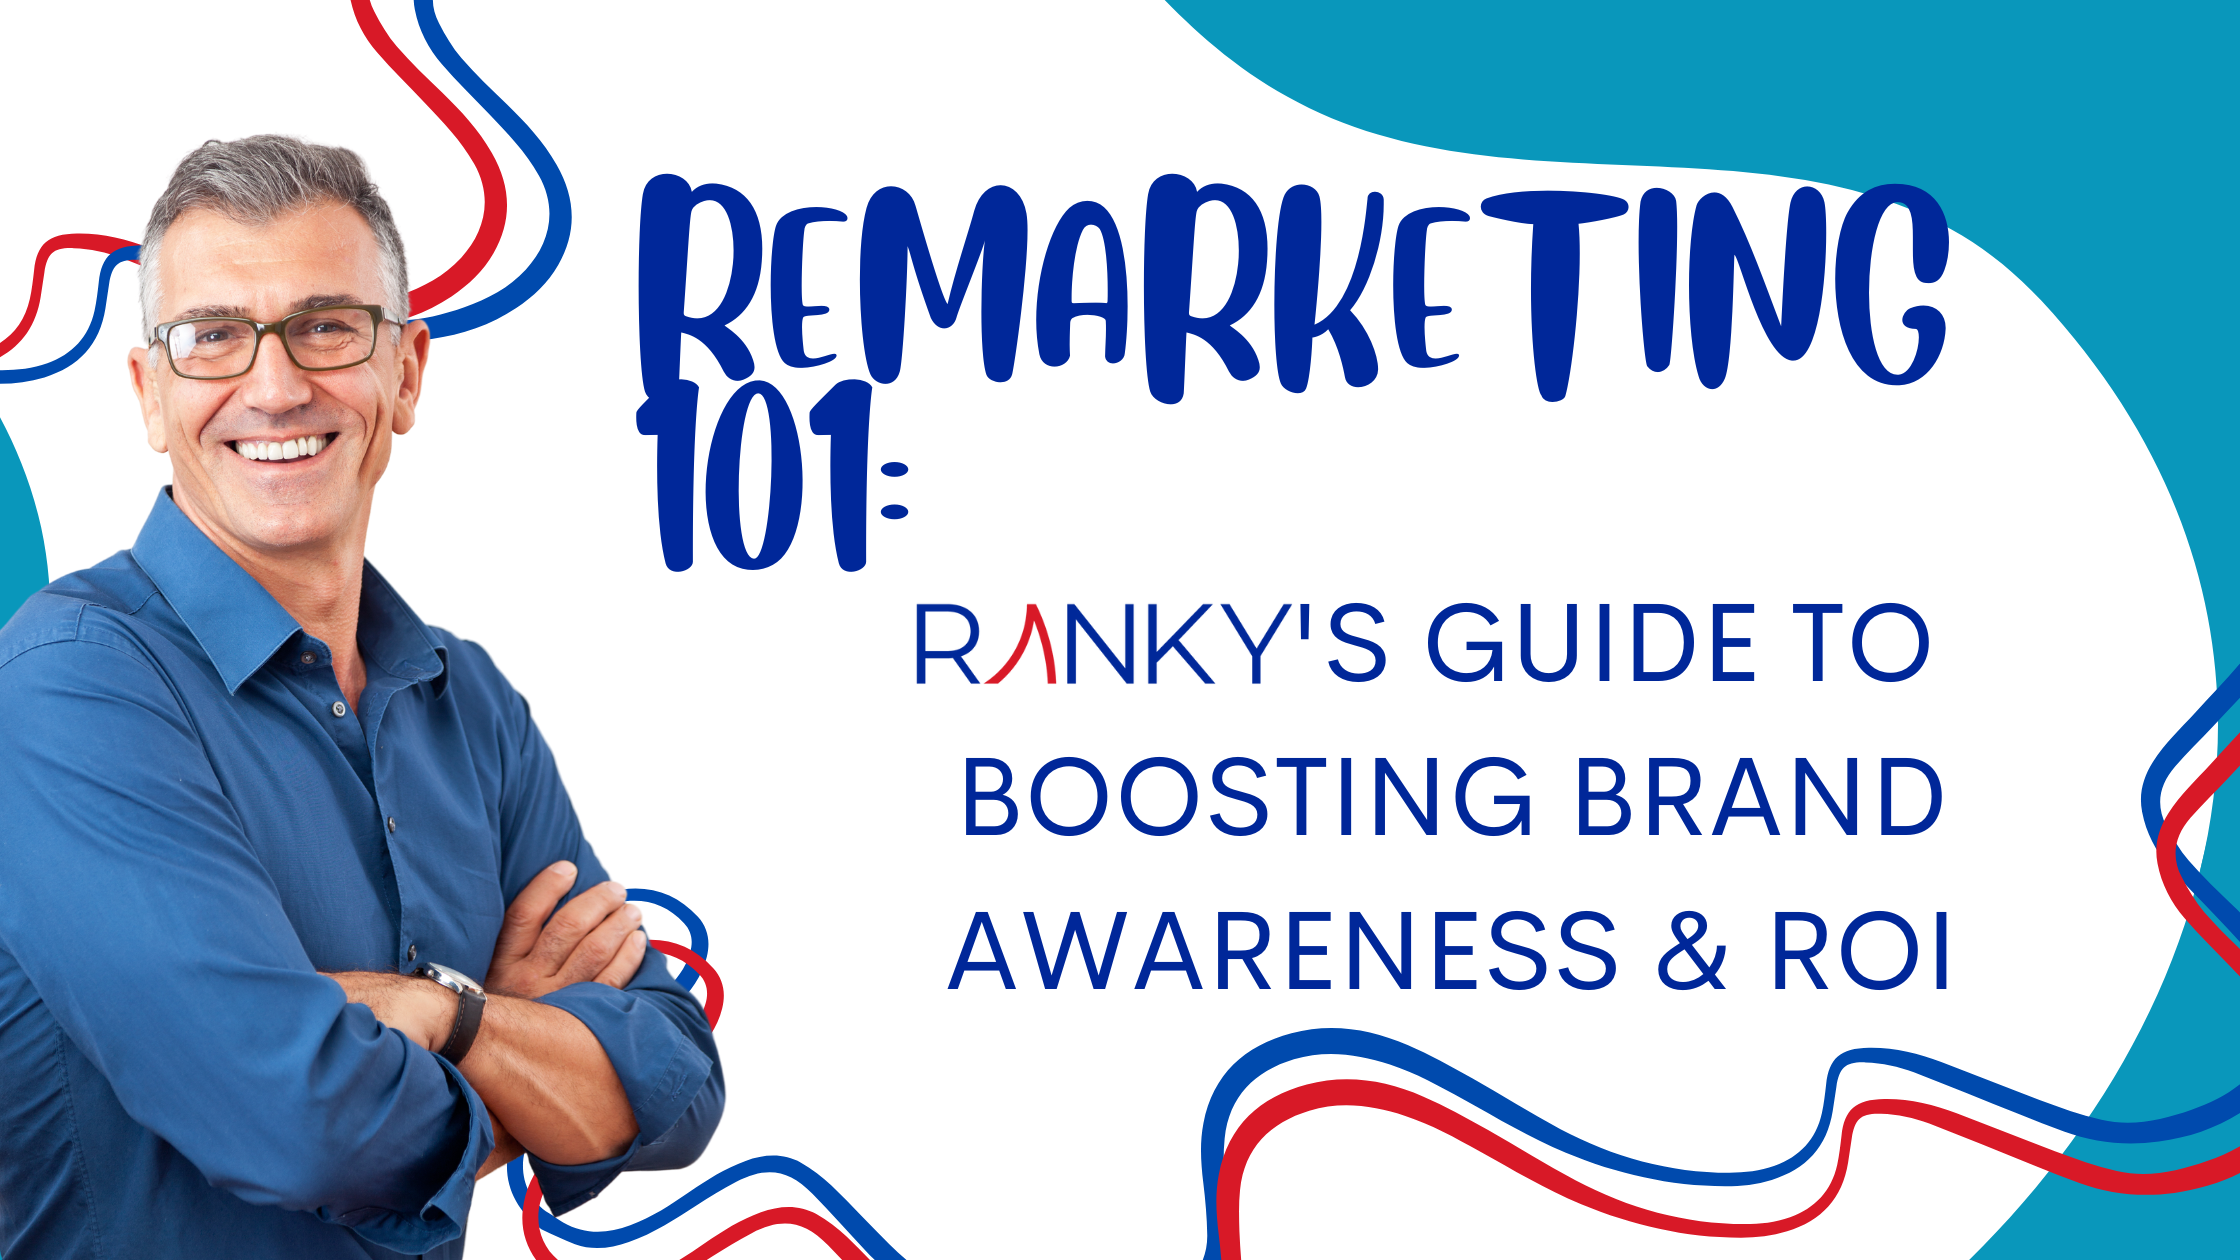 Remarketing 101: Complete Guide to Boosting Your Brand Awareness & ROI